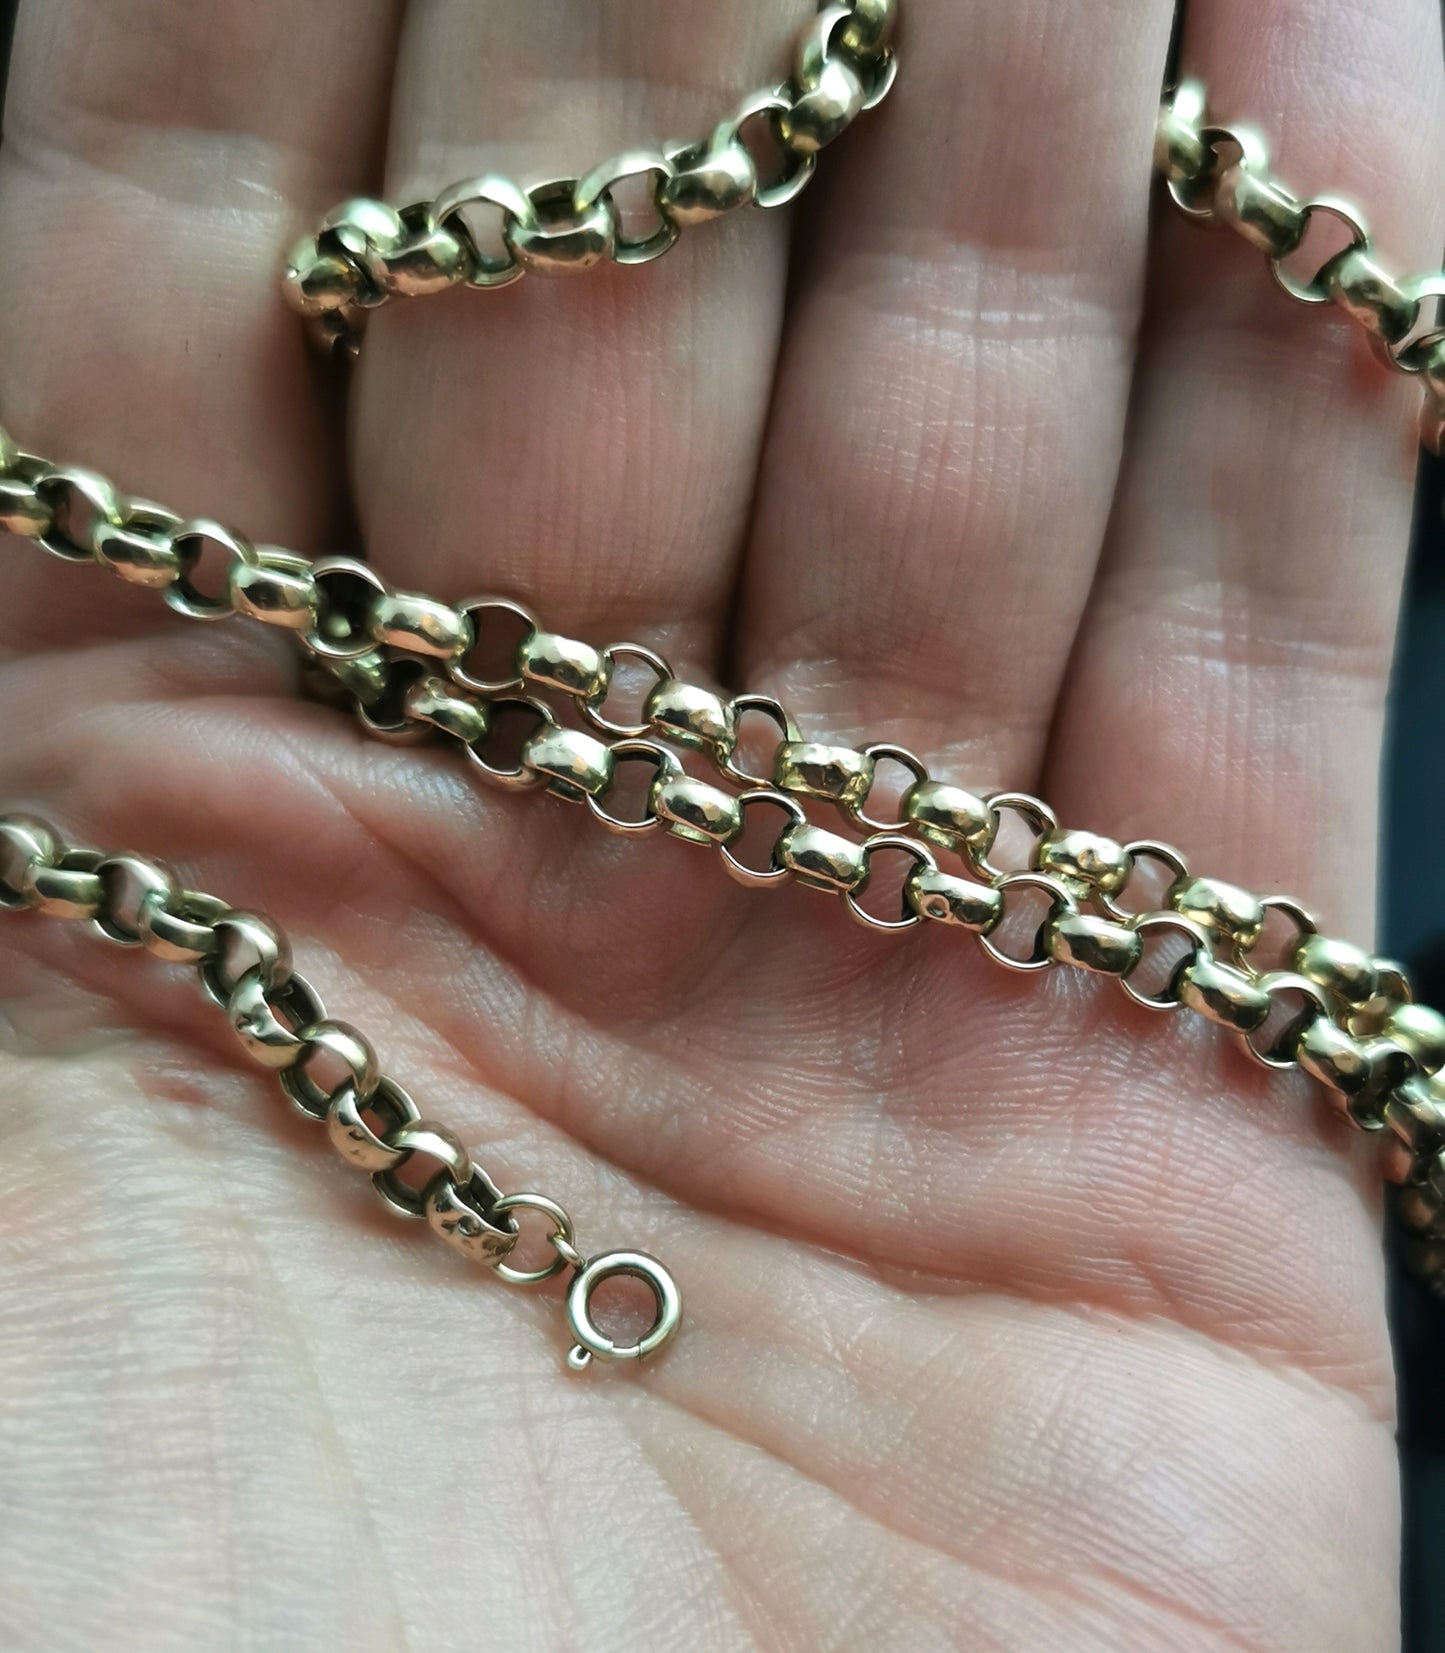 Antique 9ct yellow gold Belcher link chain necklace, rolo link